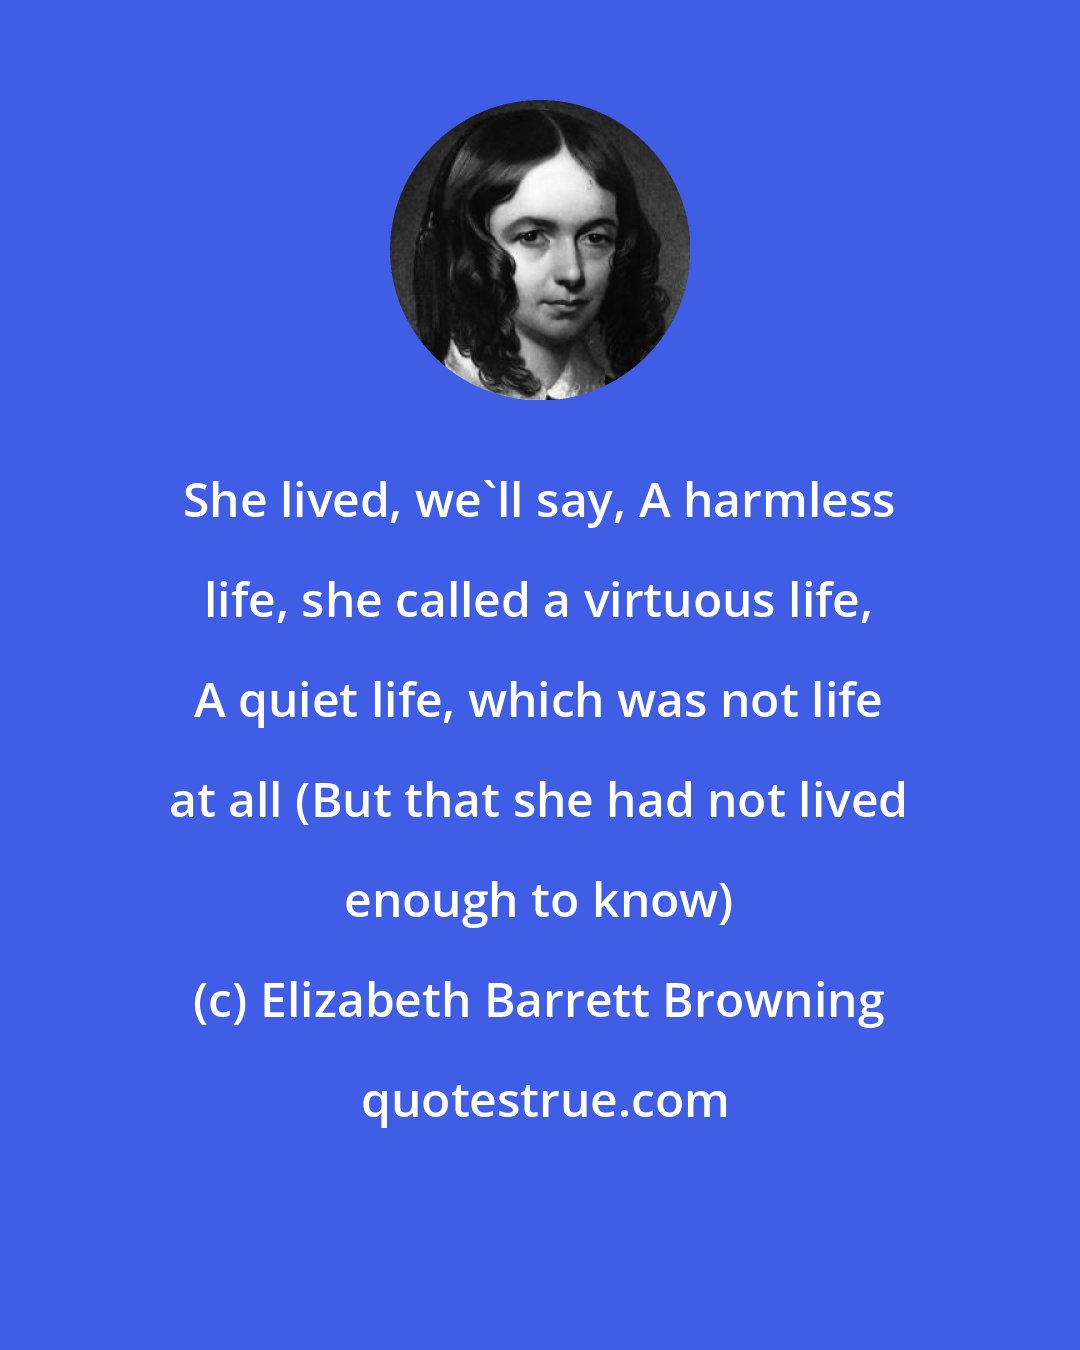 Elizabeth Barrett Browning: She lived, we'll say, A harmless life, she called a virtuous life, A quiet life, which was not life at all (But that she had not lived enough to know)